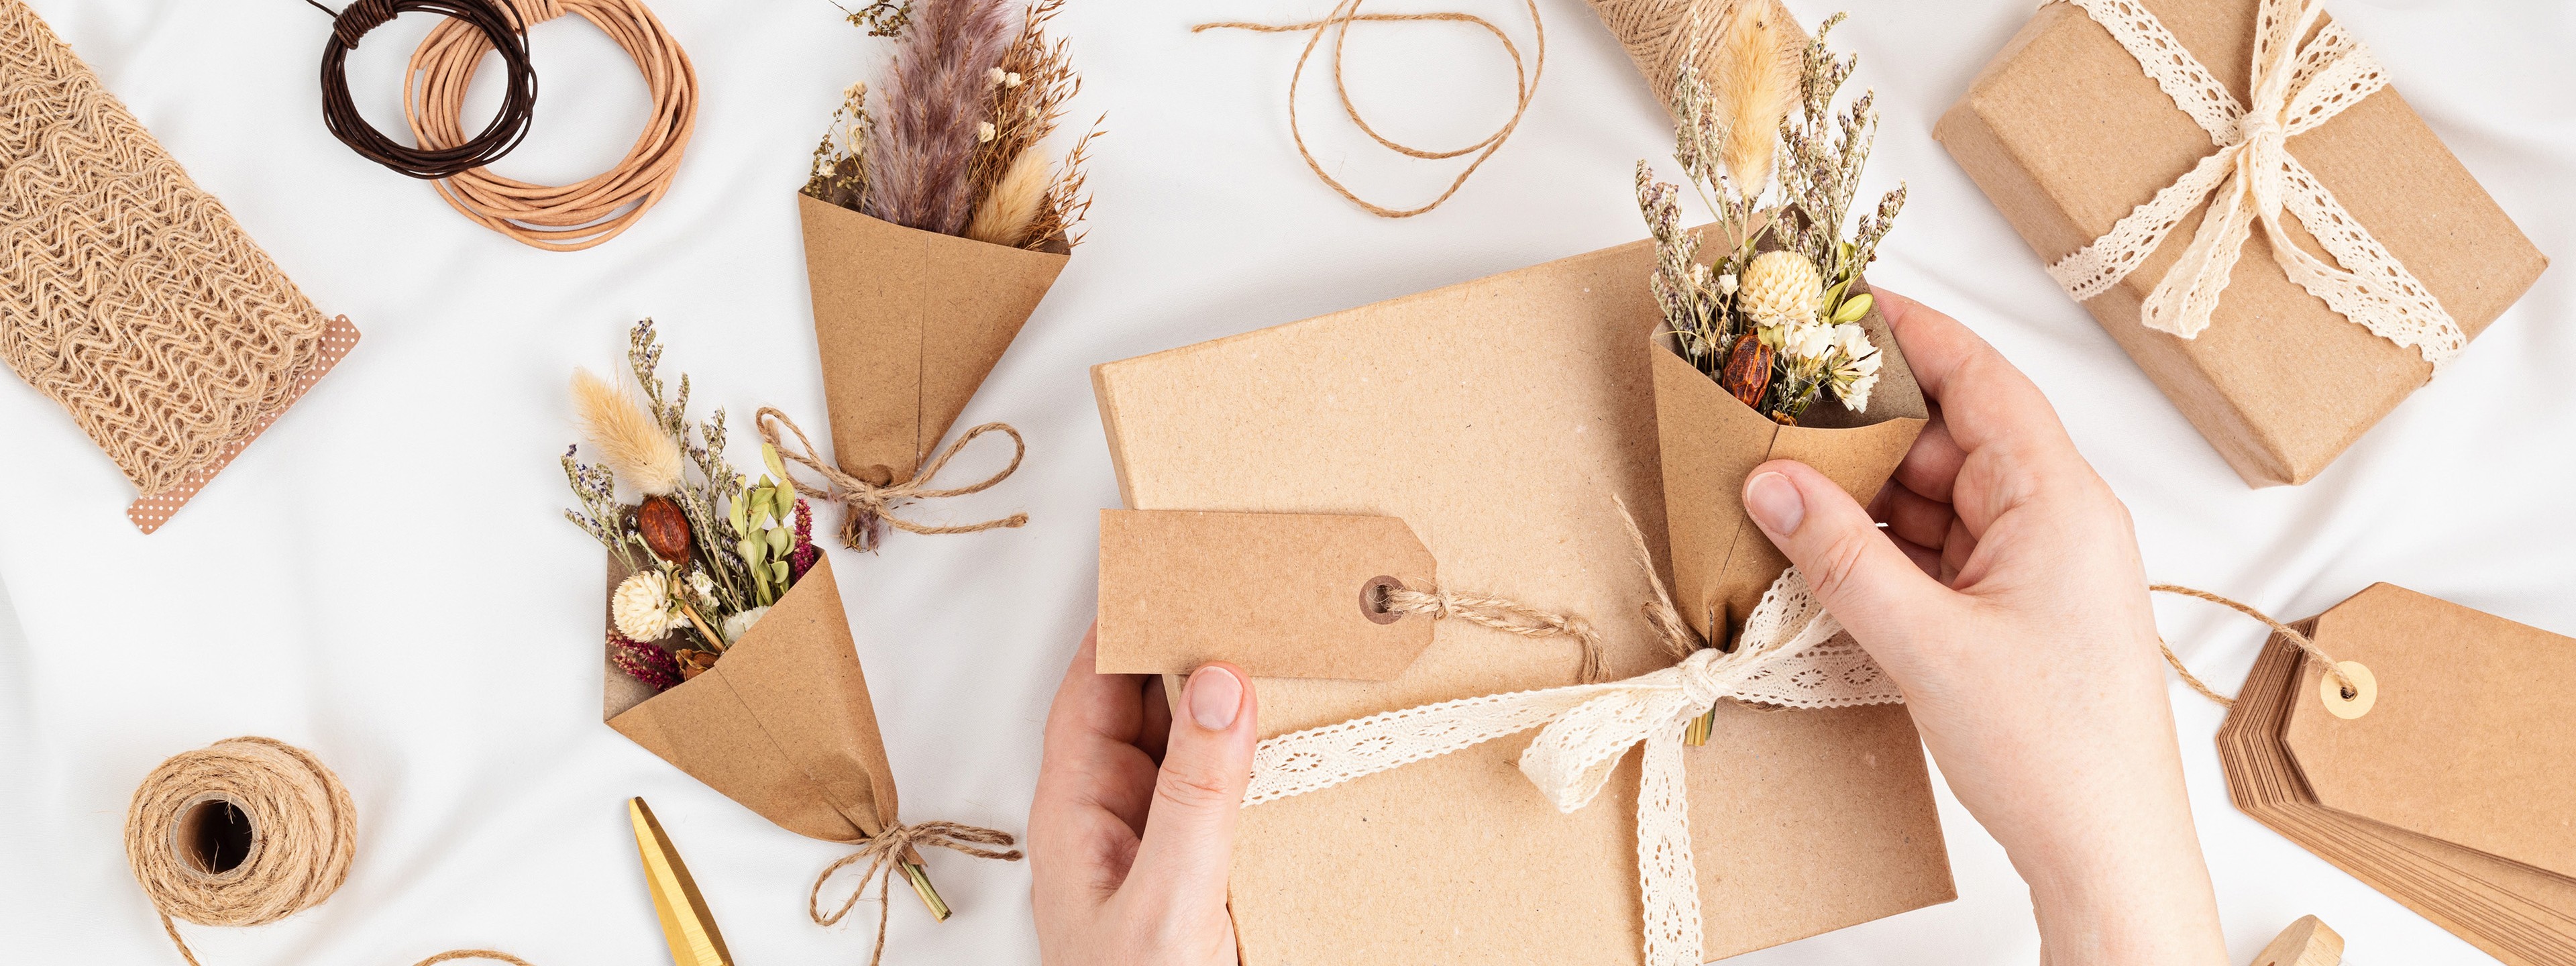 Gifts wrapped in brown paper with pine and twine and paper stars